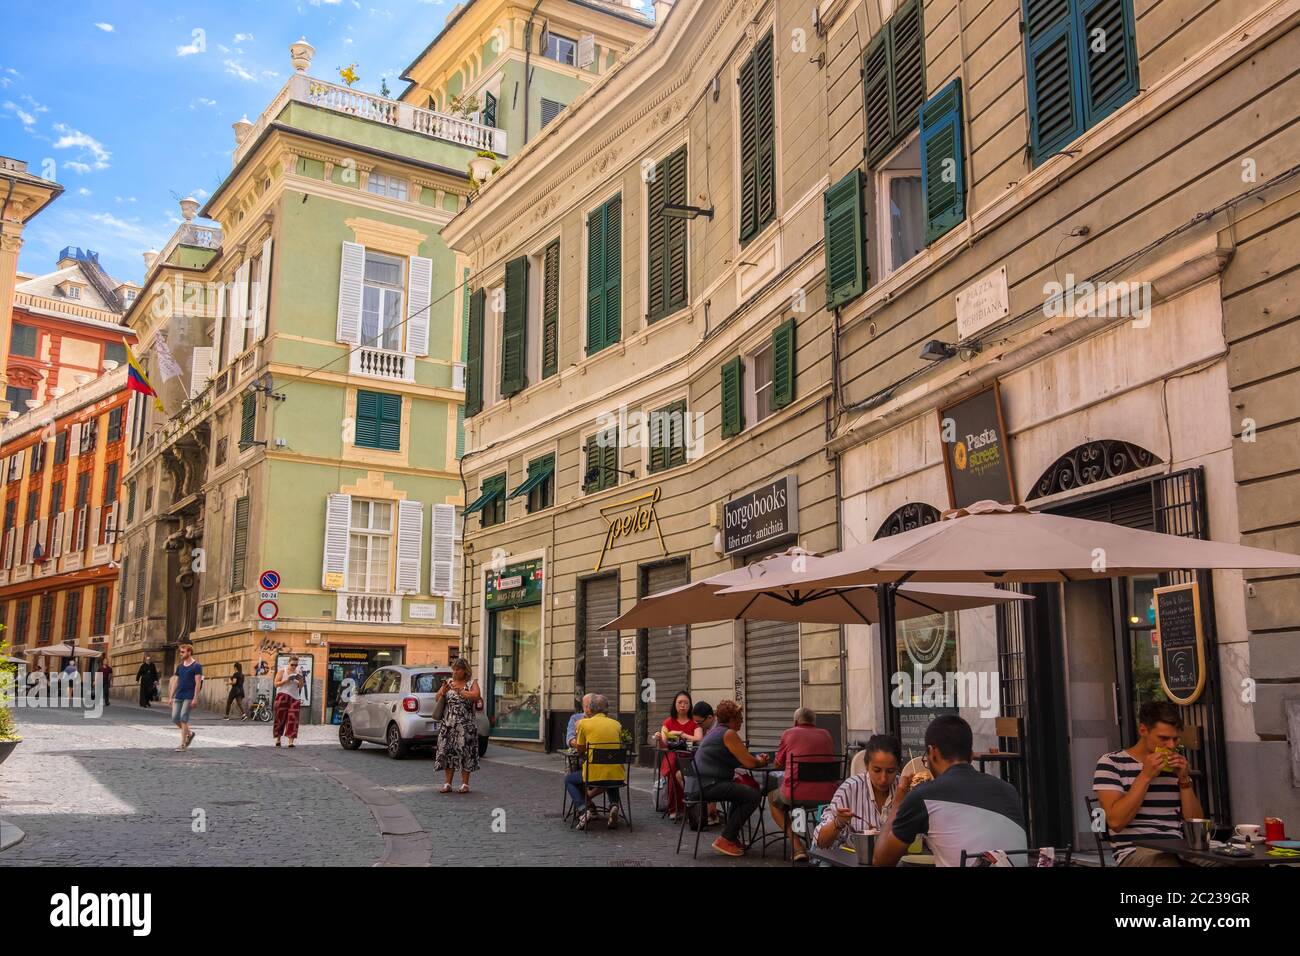 Genoa, Italy - August 20, 2019: Tourists and locals in street cafe on Piazza della Meridiana square in Genova, region of Liguria, Italy Stock Photo